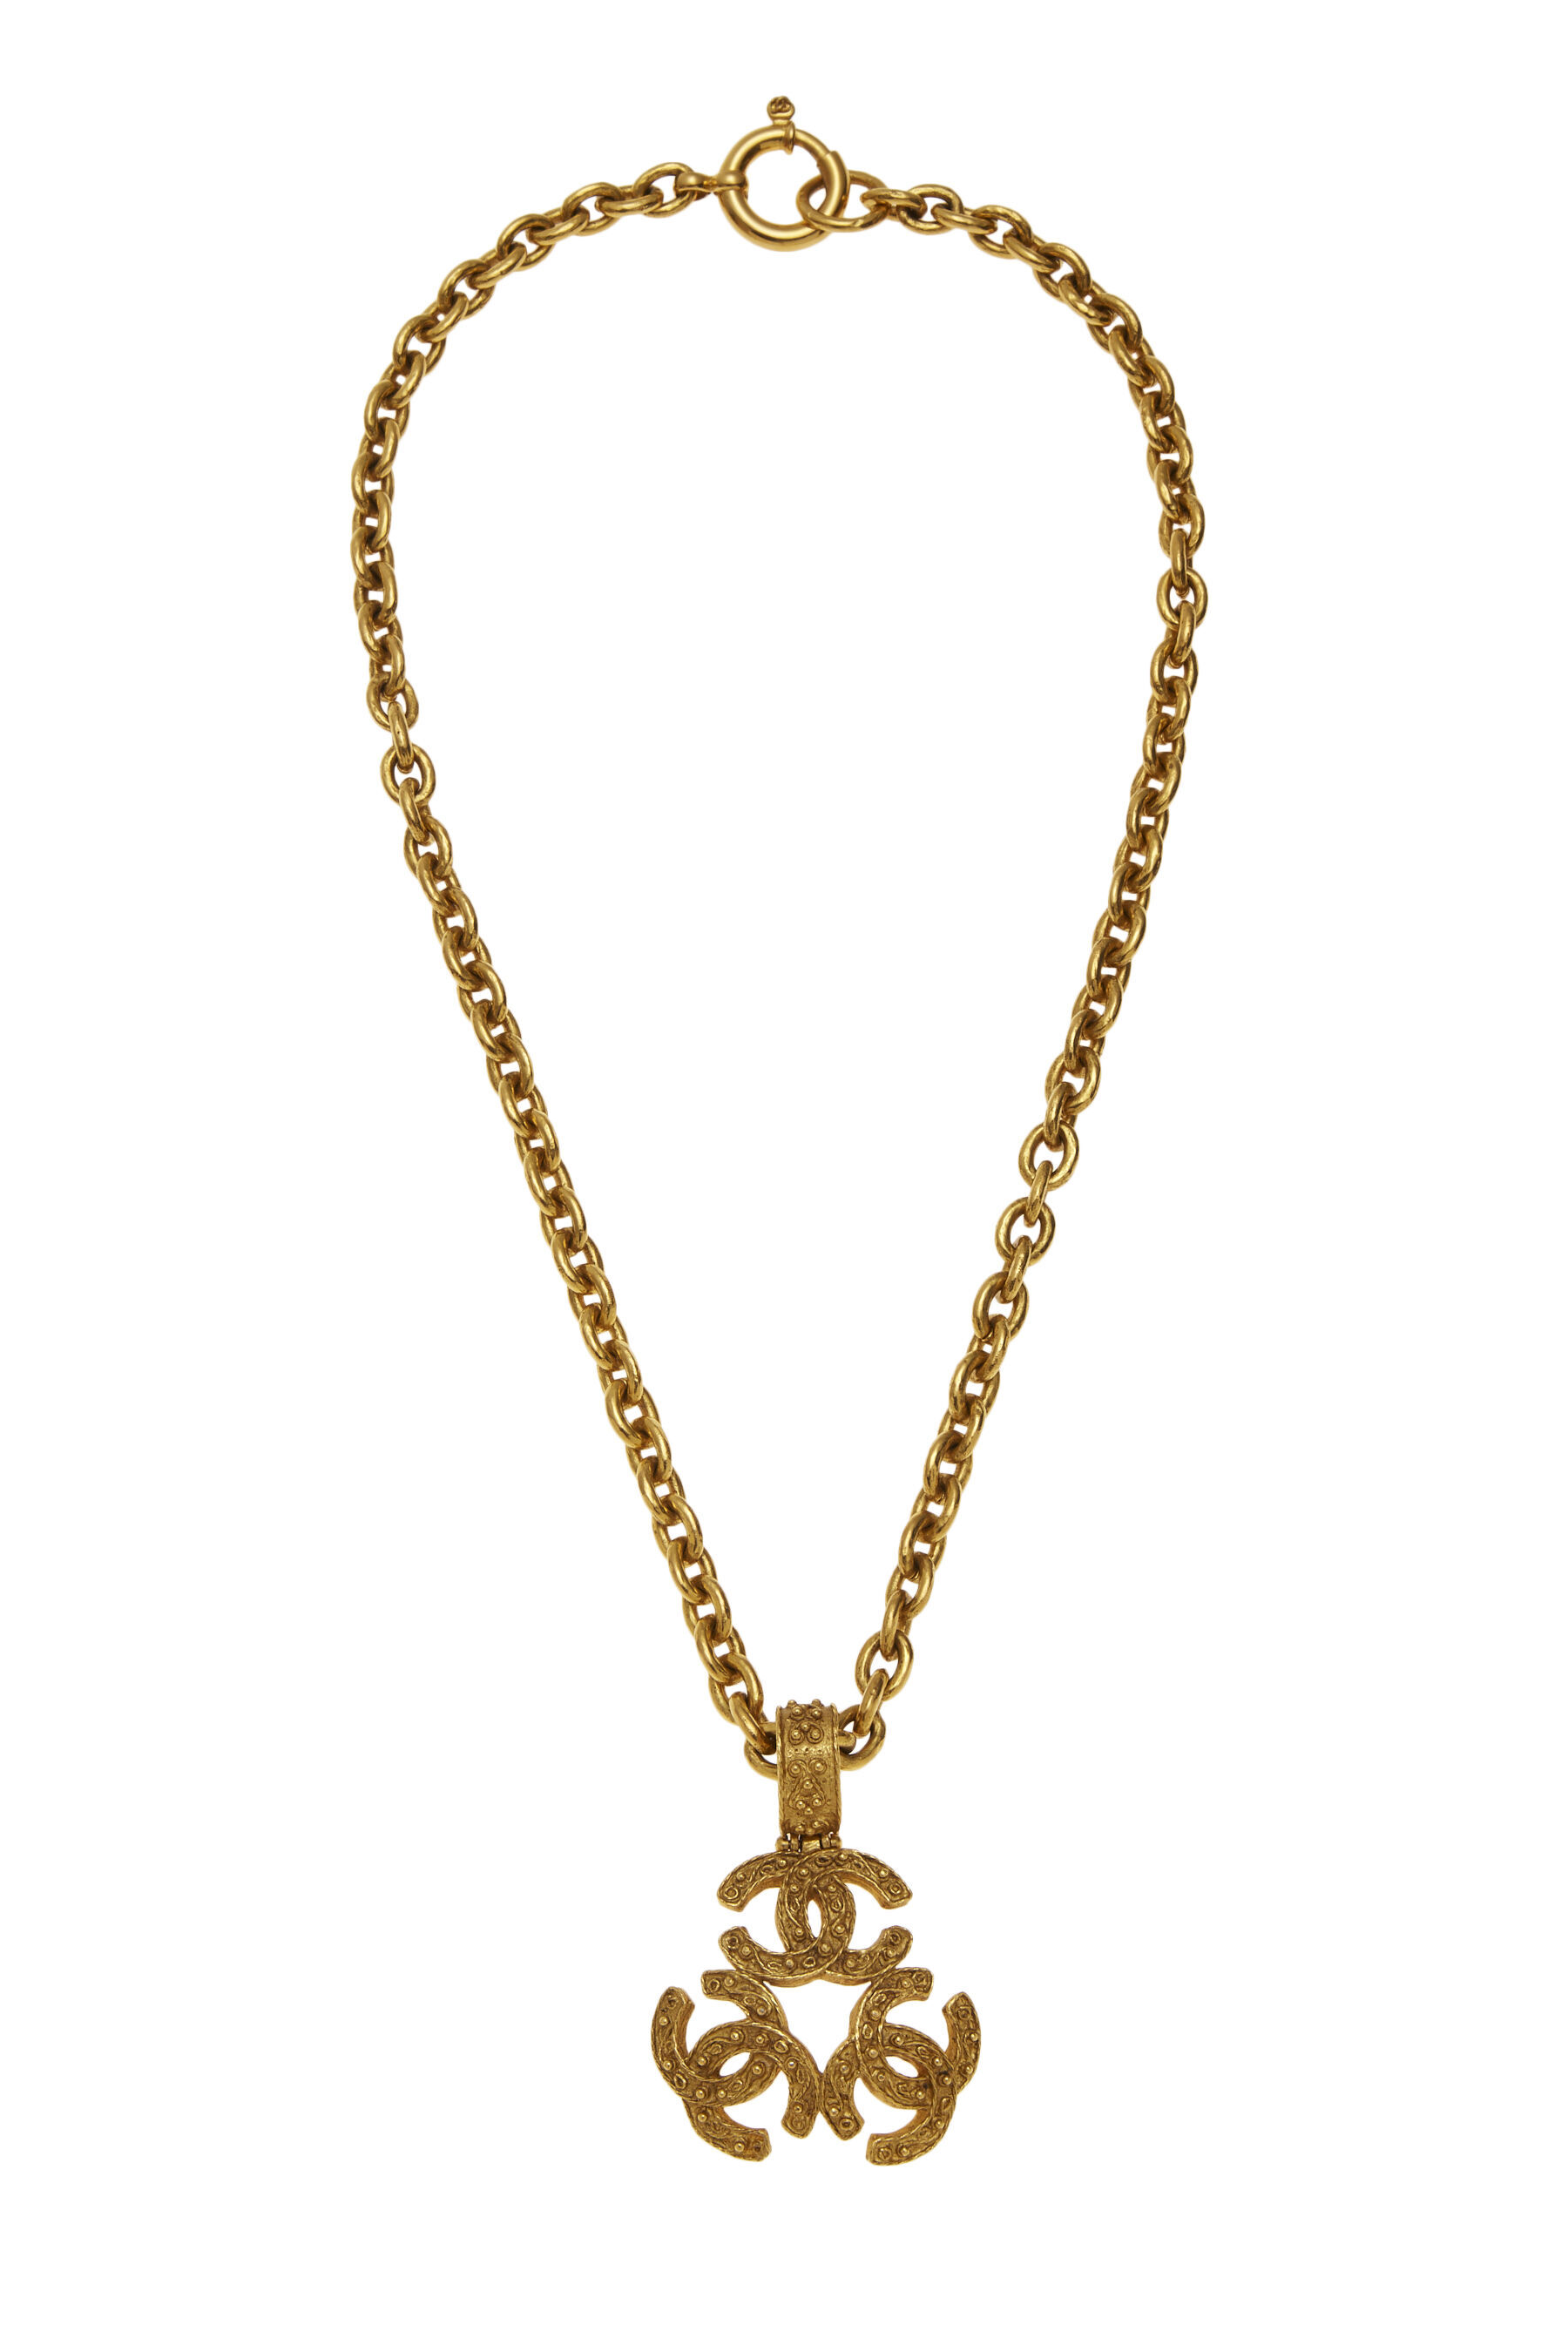 CHANEL CRYSTAL FILLED BOW & CC LOGO DROP NECKLACE